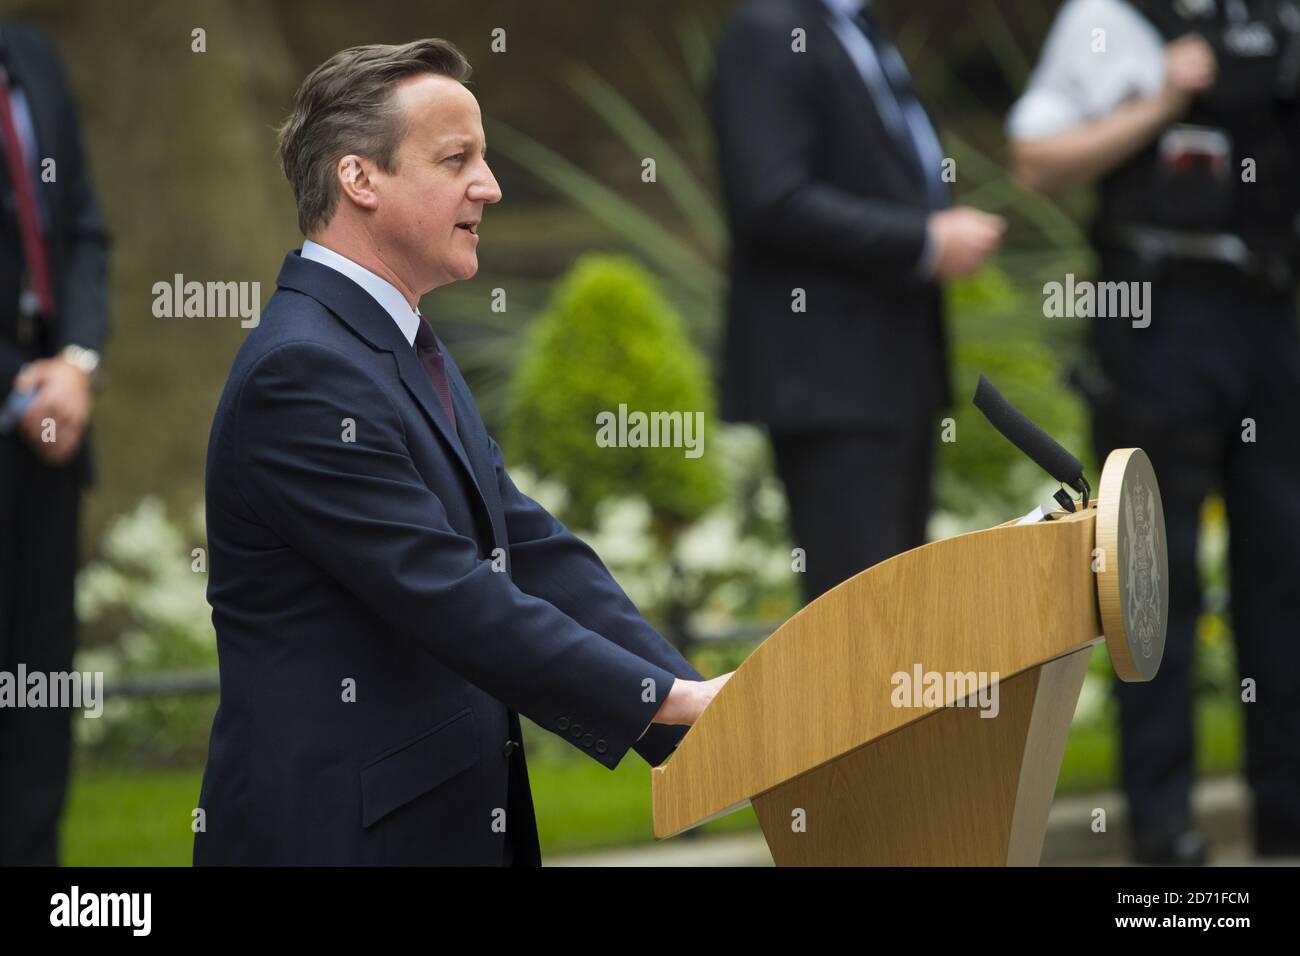 David Cameron makes a statement to the waiting media at number 10 Downing Street, after an audience with the Queen to confirm his second term as Prime Minister following his party's General Election victory. Stock Photo